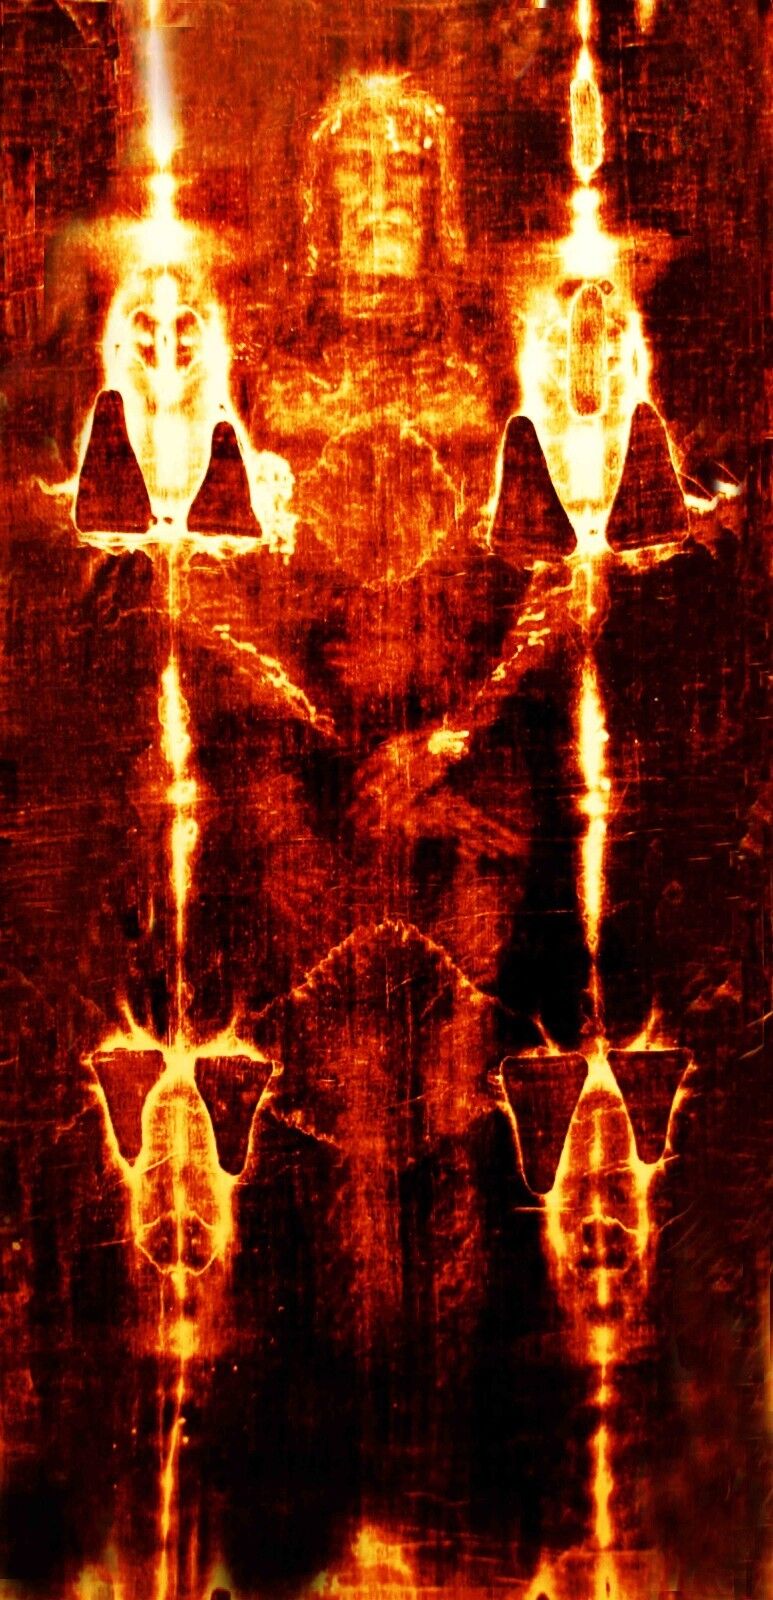 SHROUD OF TURIN 24x12 Hi Quality Printed on ART Canvas MOUNTED GICLEE 